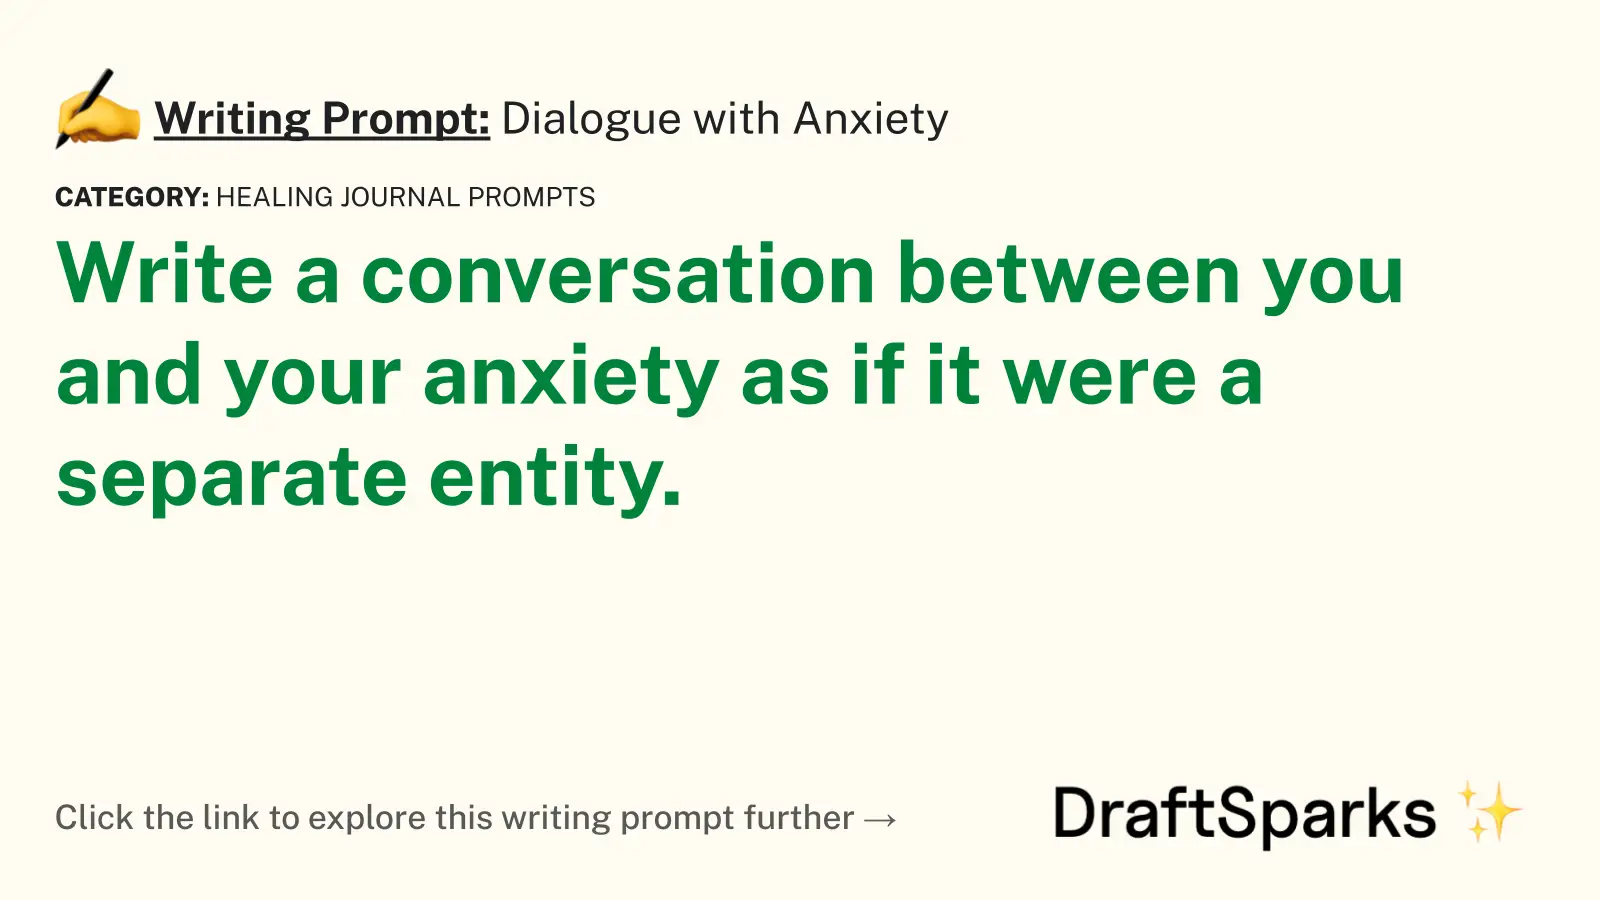 Dialogue with Anxiety